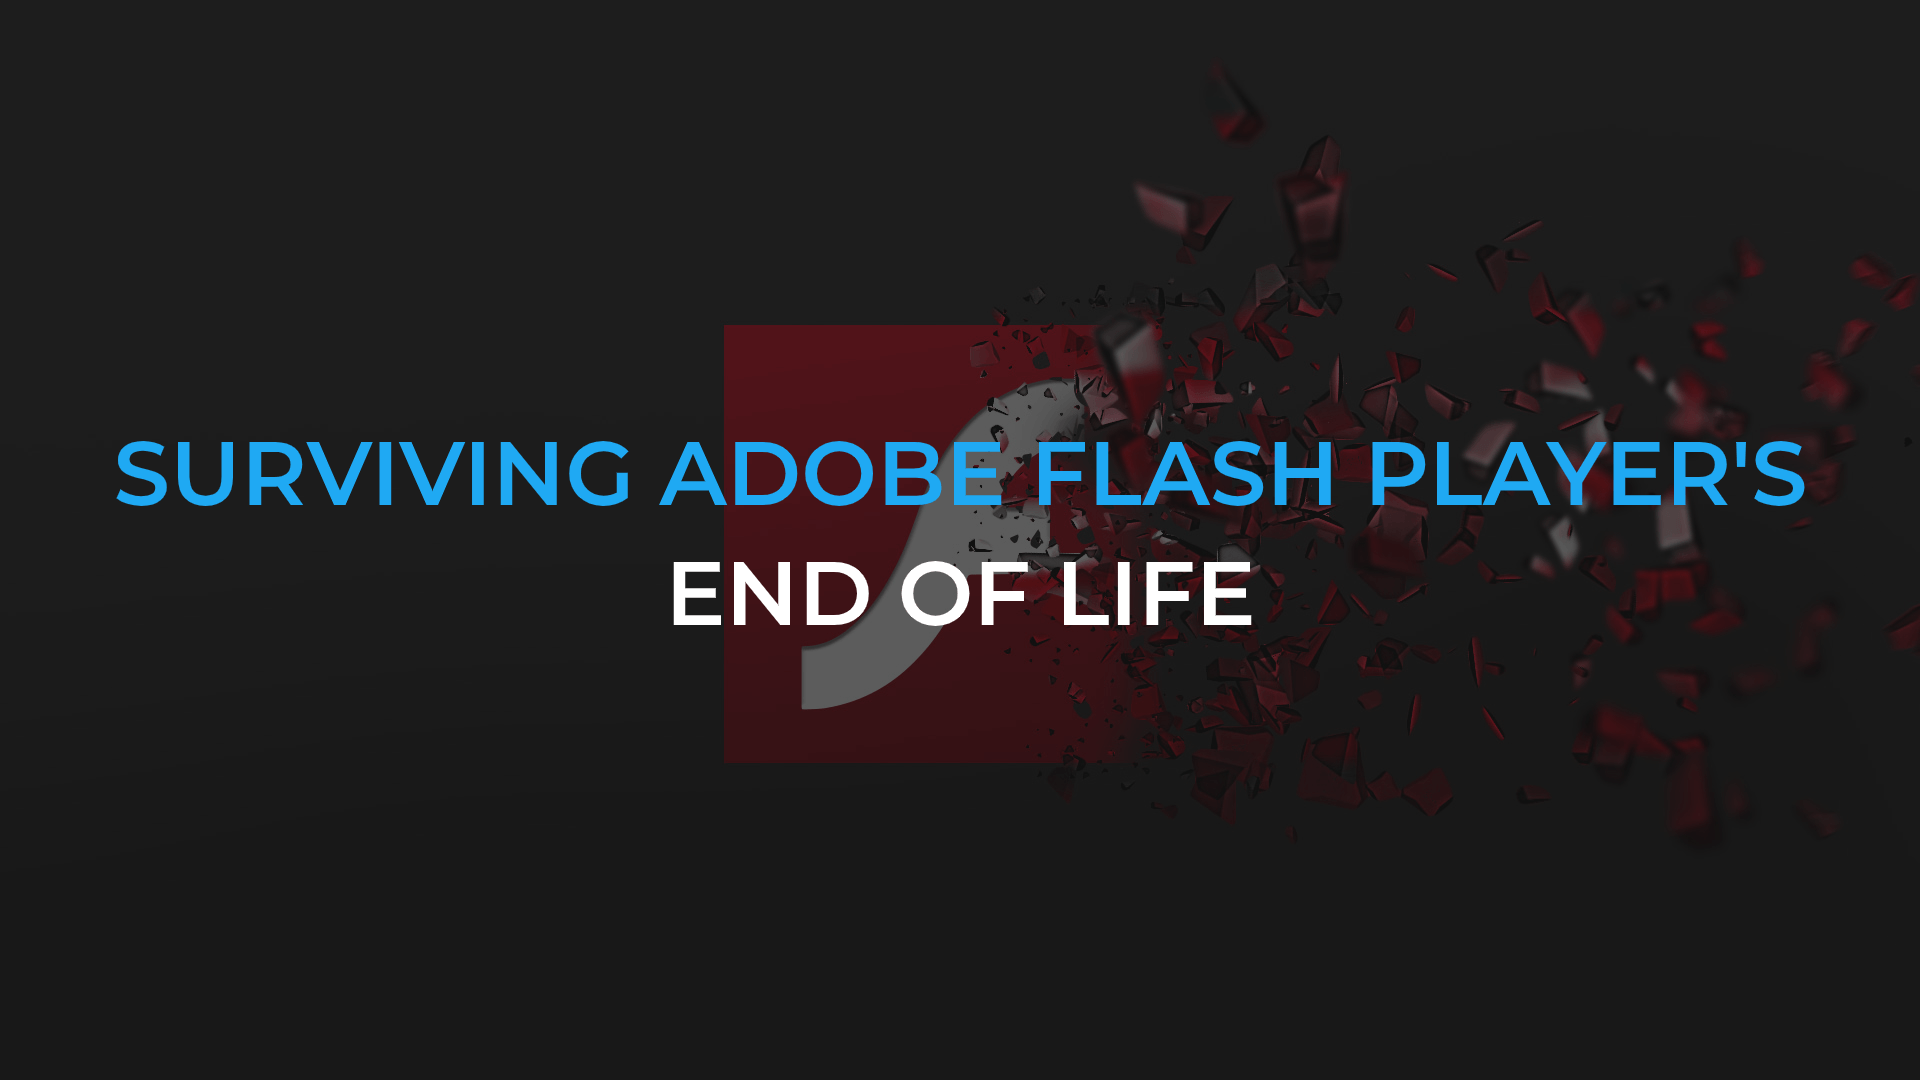 Surviving Adobe Flash Player’s end of life